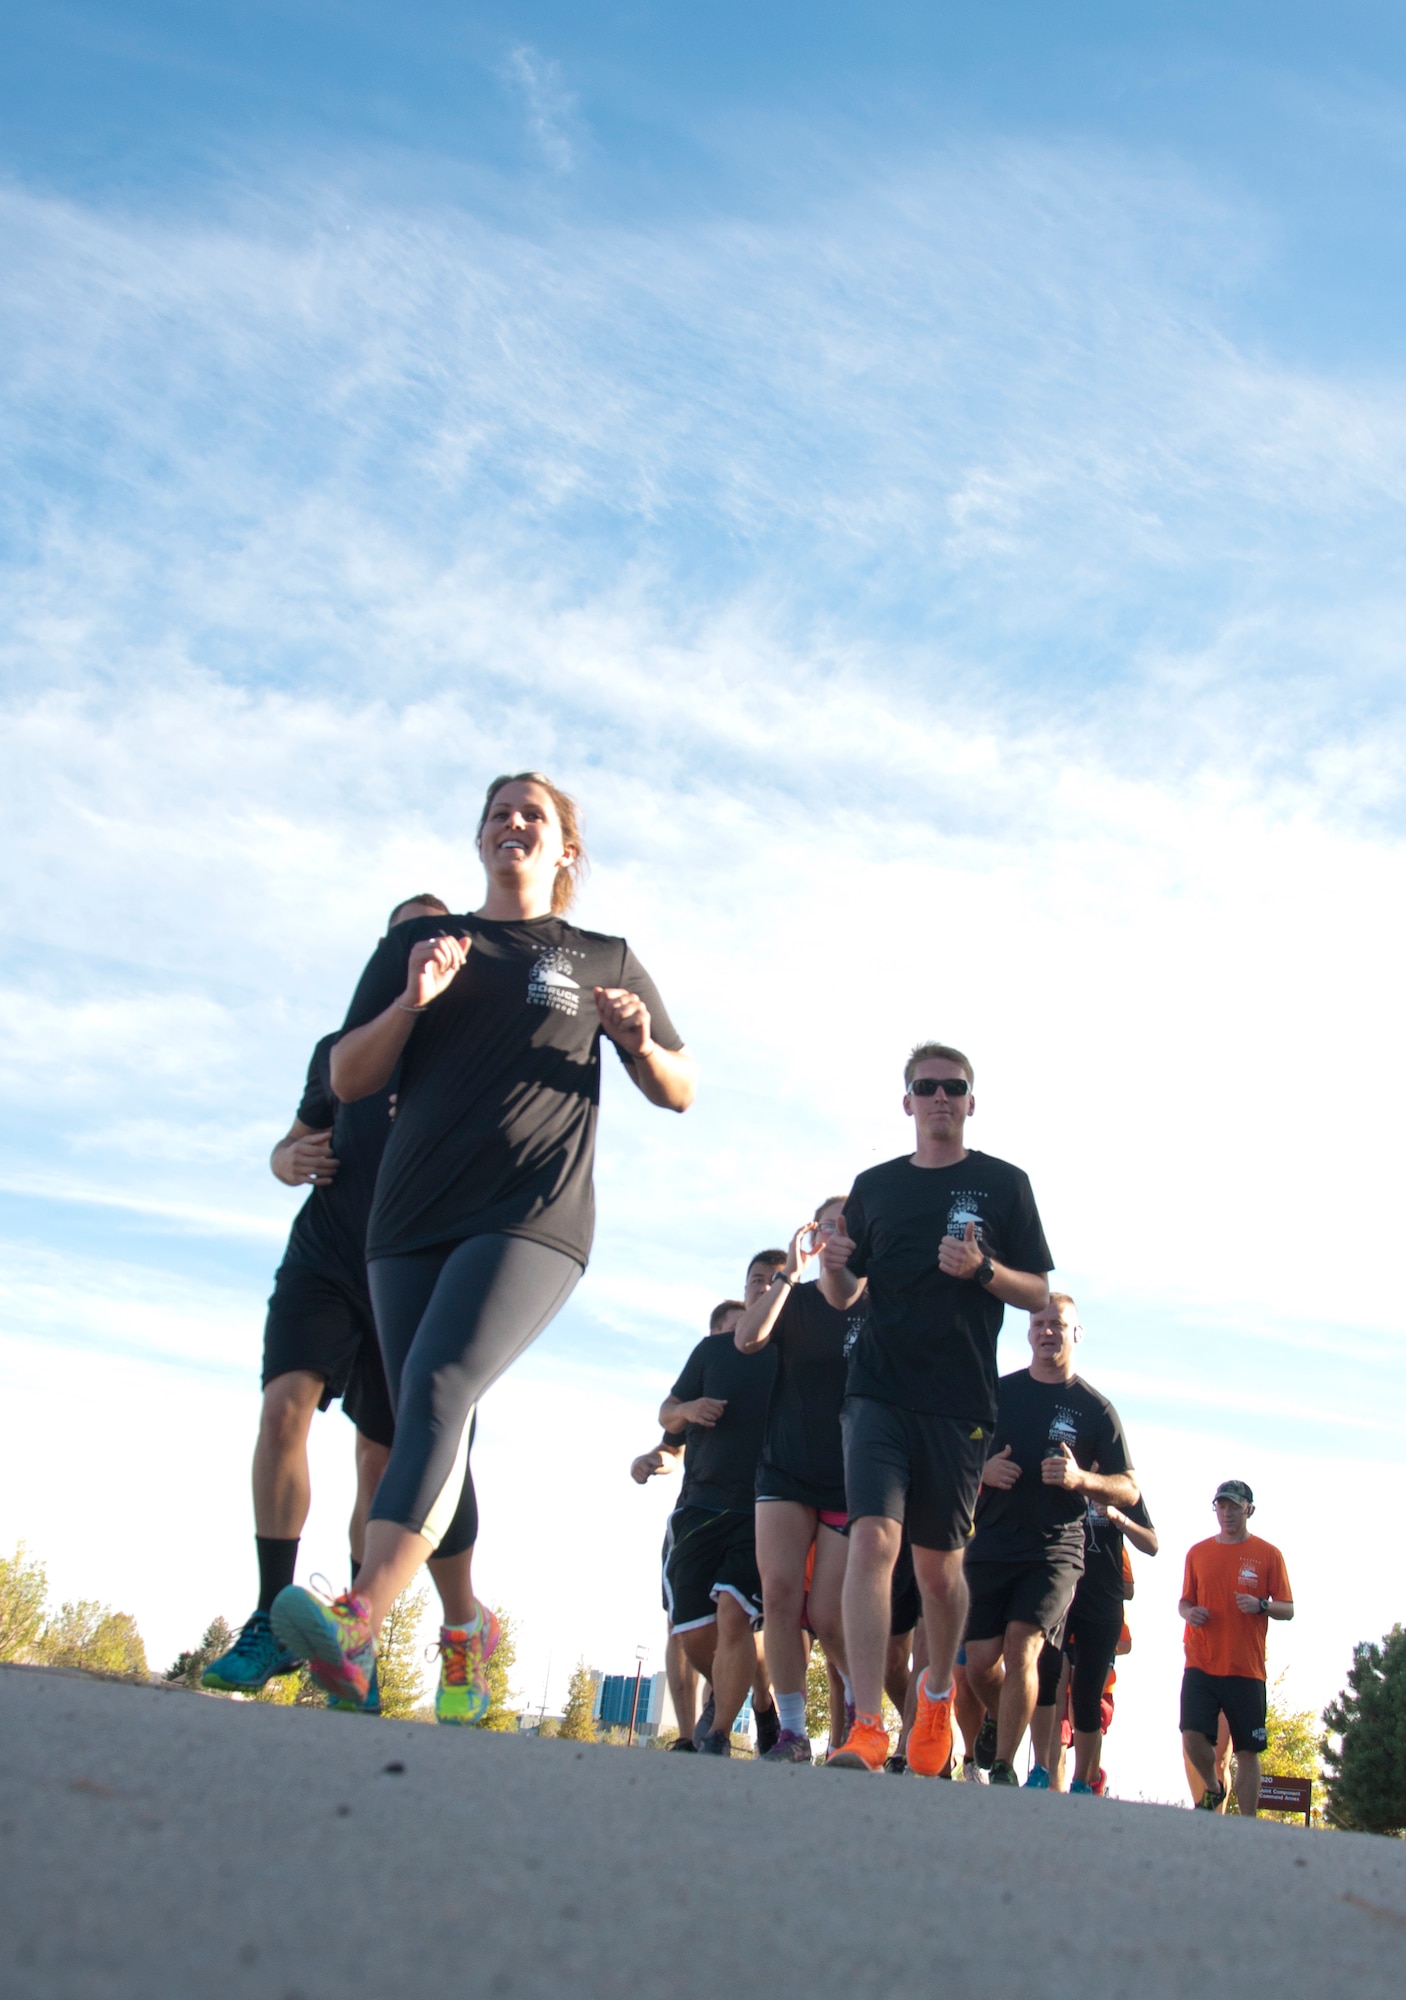 Team Buckley members run the Team Cohesion Challenge 5K Oct. 7, 2014, at the track on Buckley Air Force Base, Colo. The 5K kicked off the Team Cohesion Challenge, a GORUCK event made available to all Team Buckley members to incorporate the Five C's of Comprehensive Airmen Fitness: Caring, Committing, Connecting, Communicating and Celebrating. (U.S. Air Force photo by Tech. Sgt. Kali L. Gradishar/Released) 